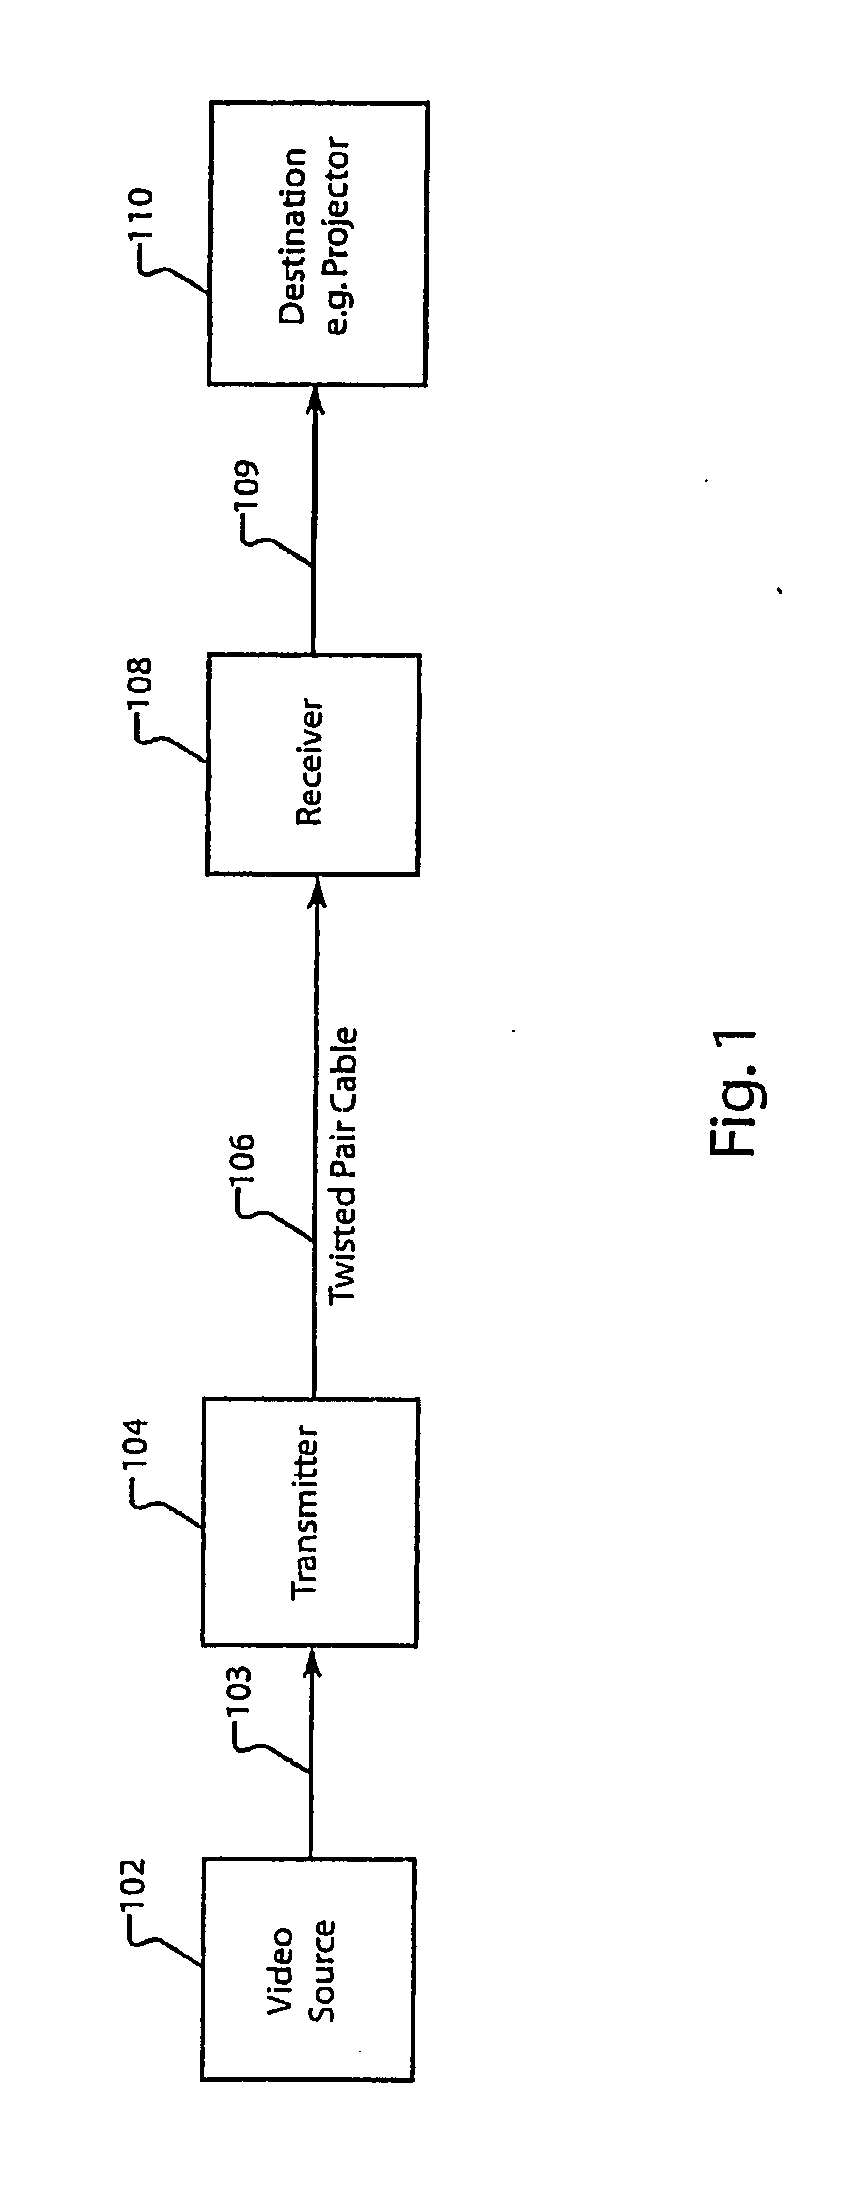 Method and apparatus for improving the quality of a transmitted video signal